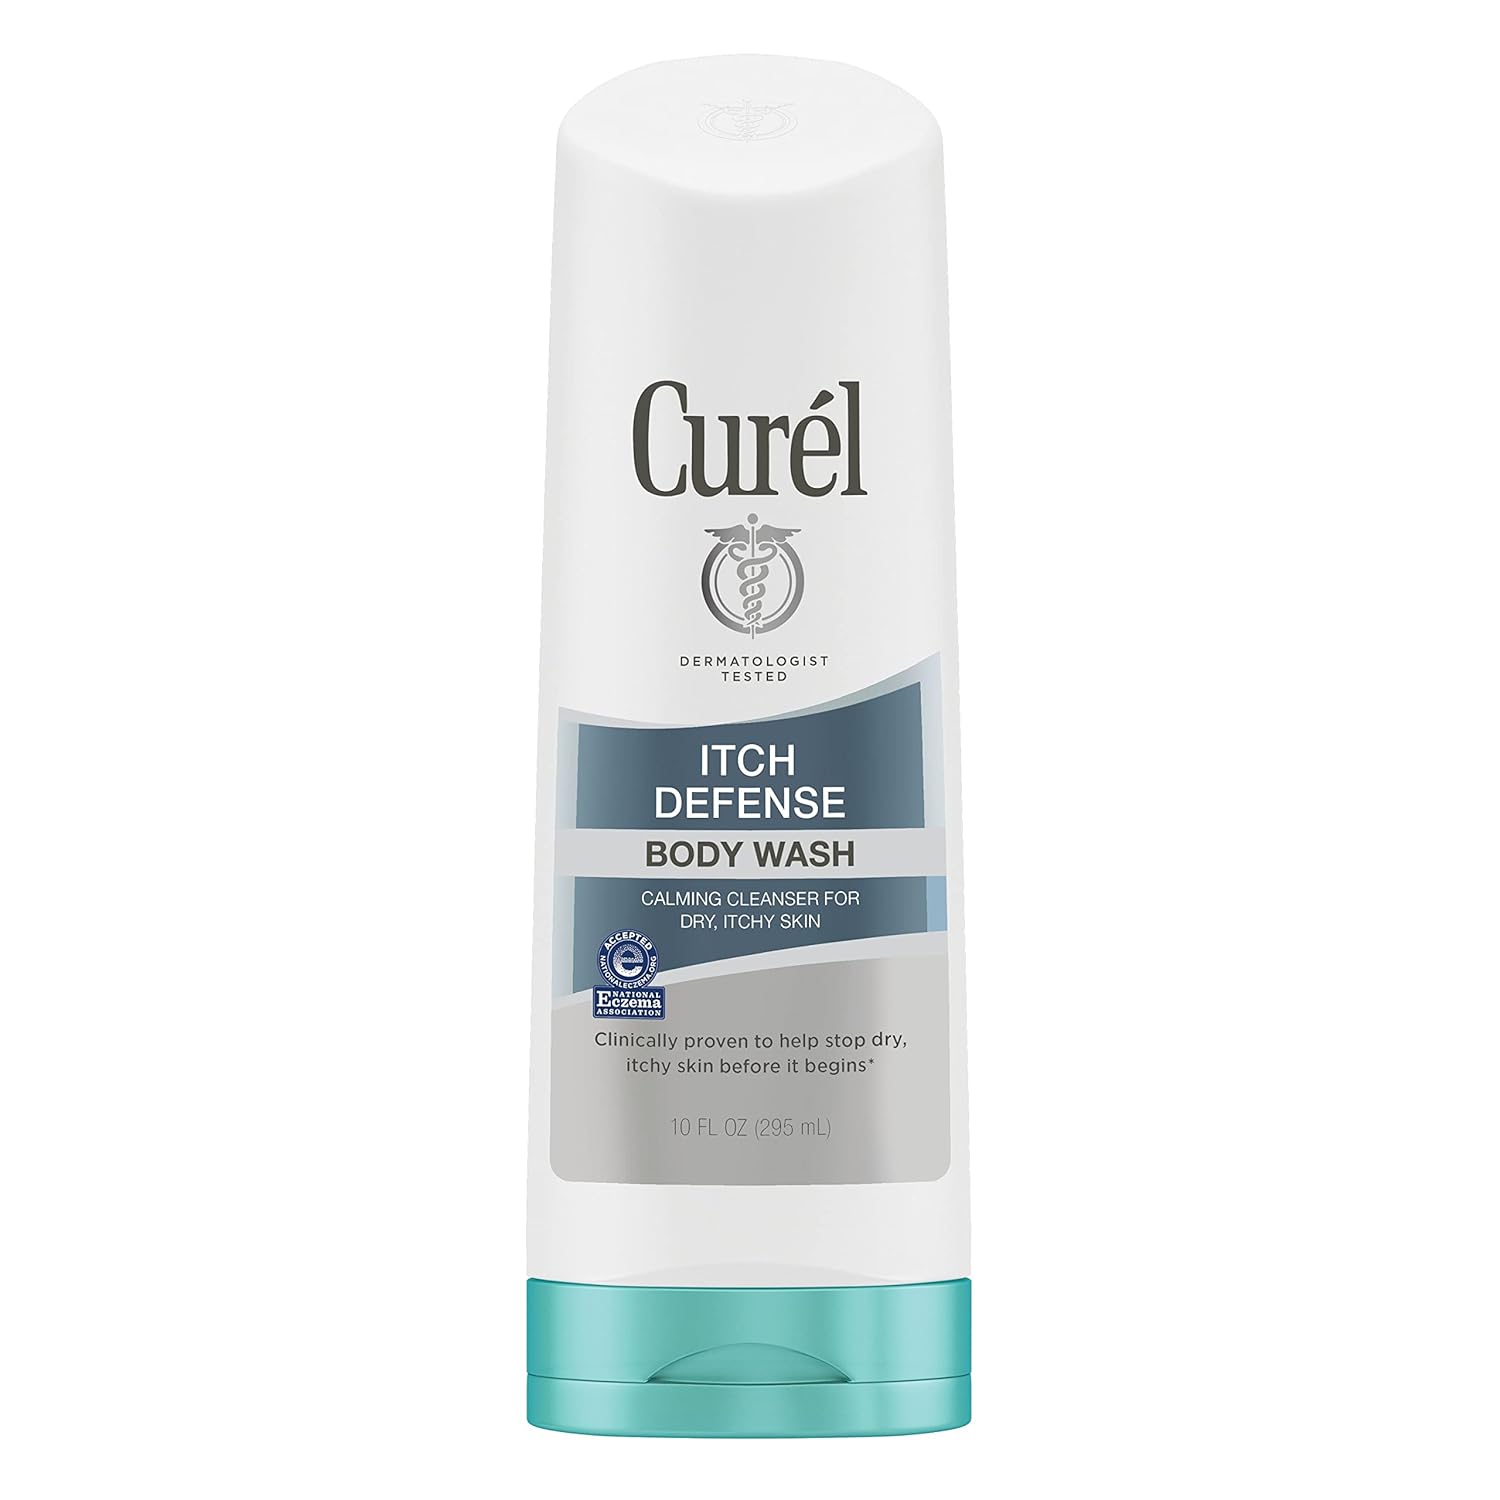 Curel Itch Defense Calming Daily Cleanse…